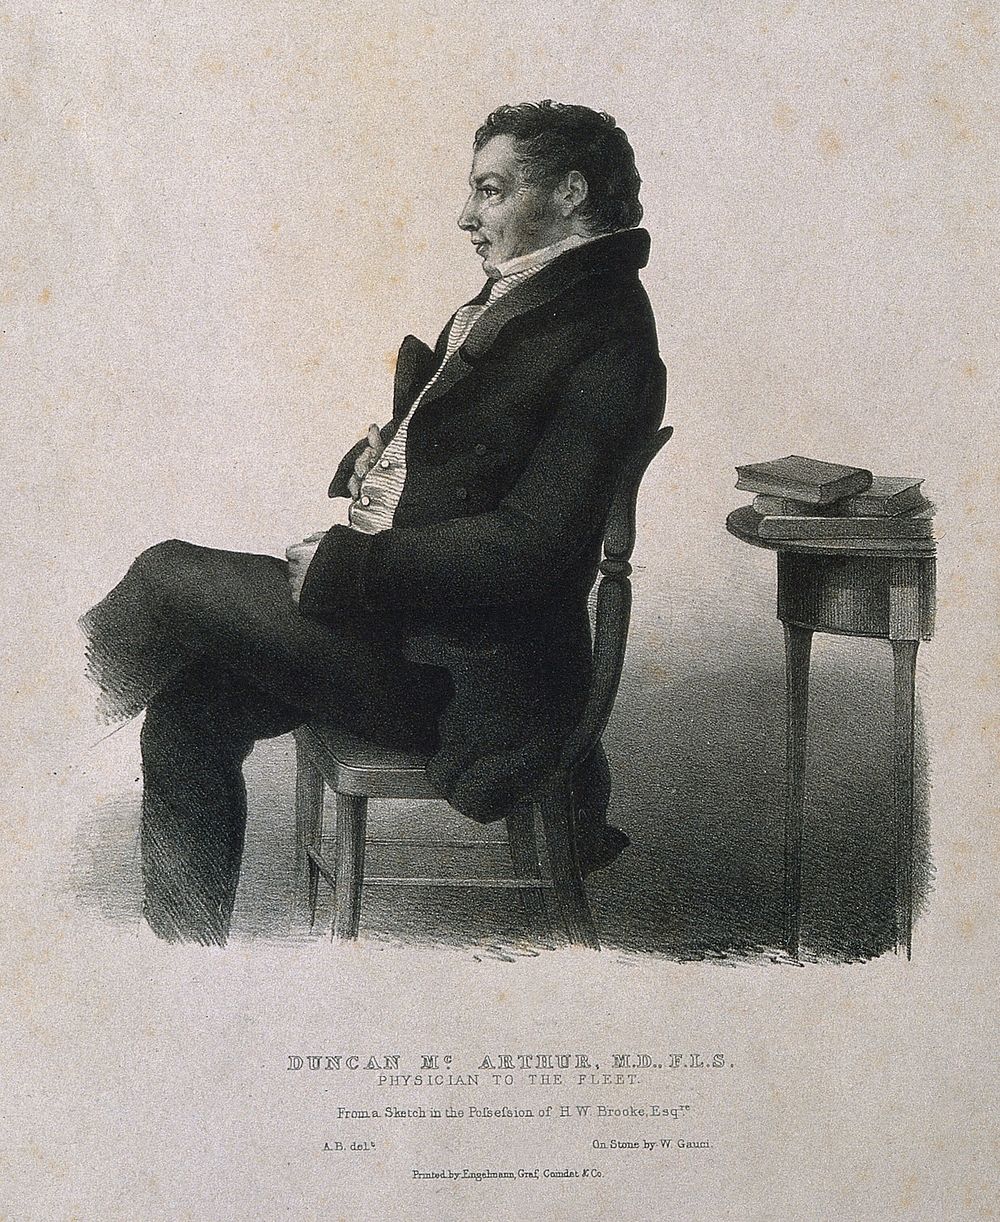 Duncan McArthur. Lithograph by W. Gauci after [A. B.].